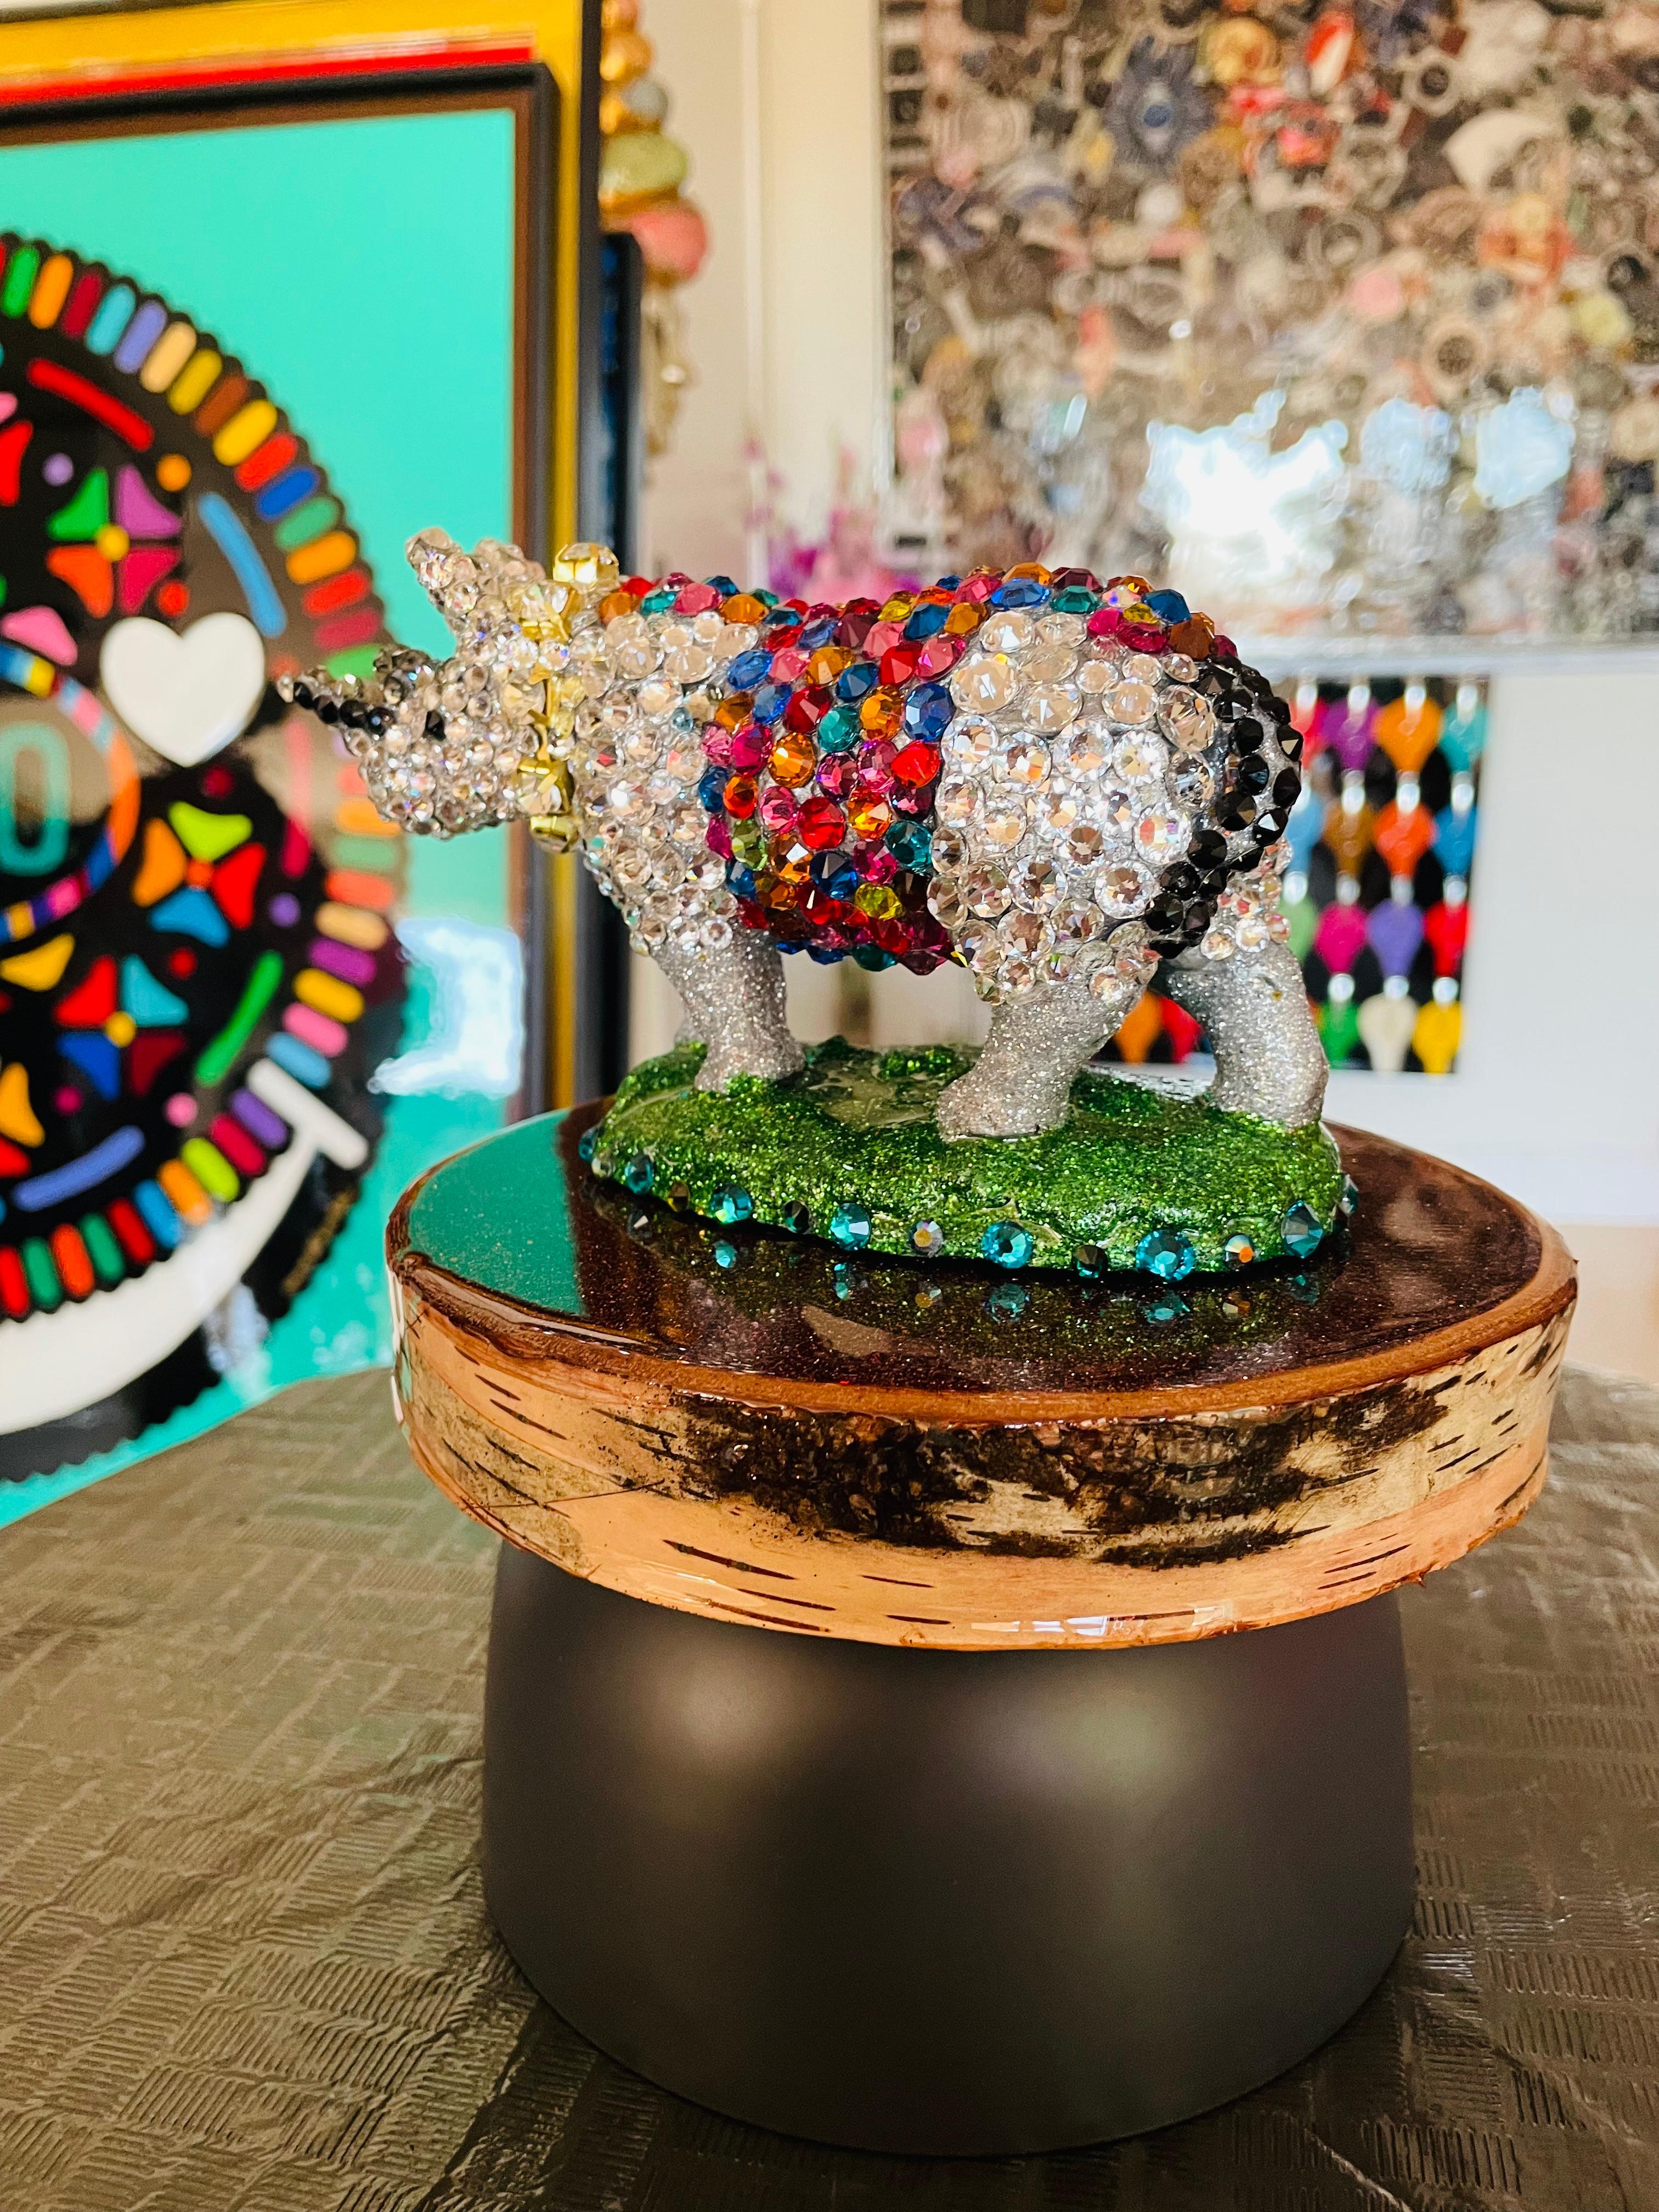 SERENGETI BOOGIE NIGHTS RINO (One of a Kind Swarovski Mixed Media Sculpture) - Brown Figurative Sculpture by Mauro Oliveira